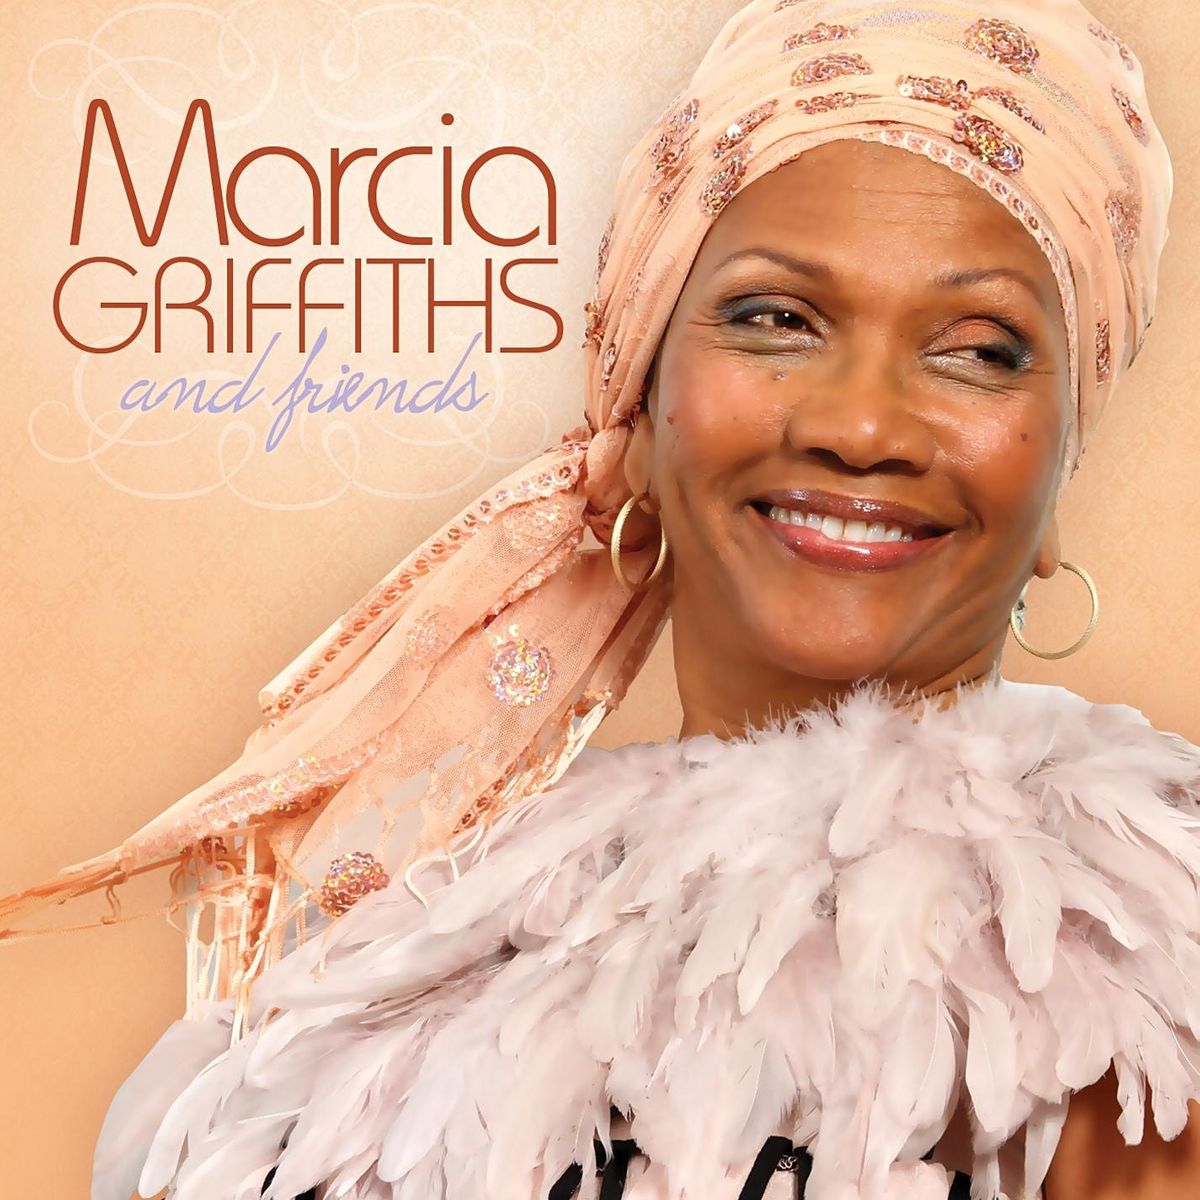 Marcia Griffiths: The Empress of Reggae